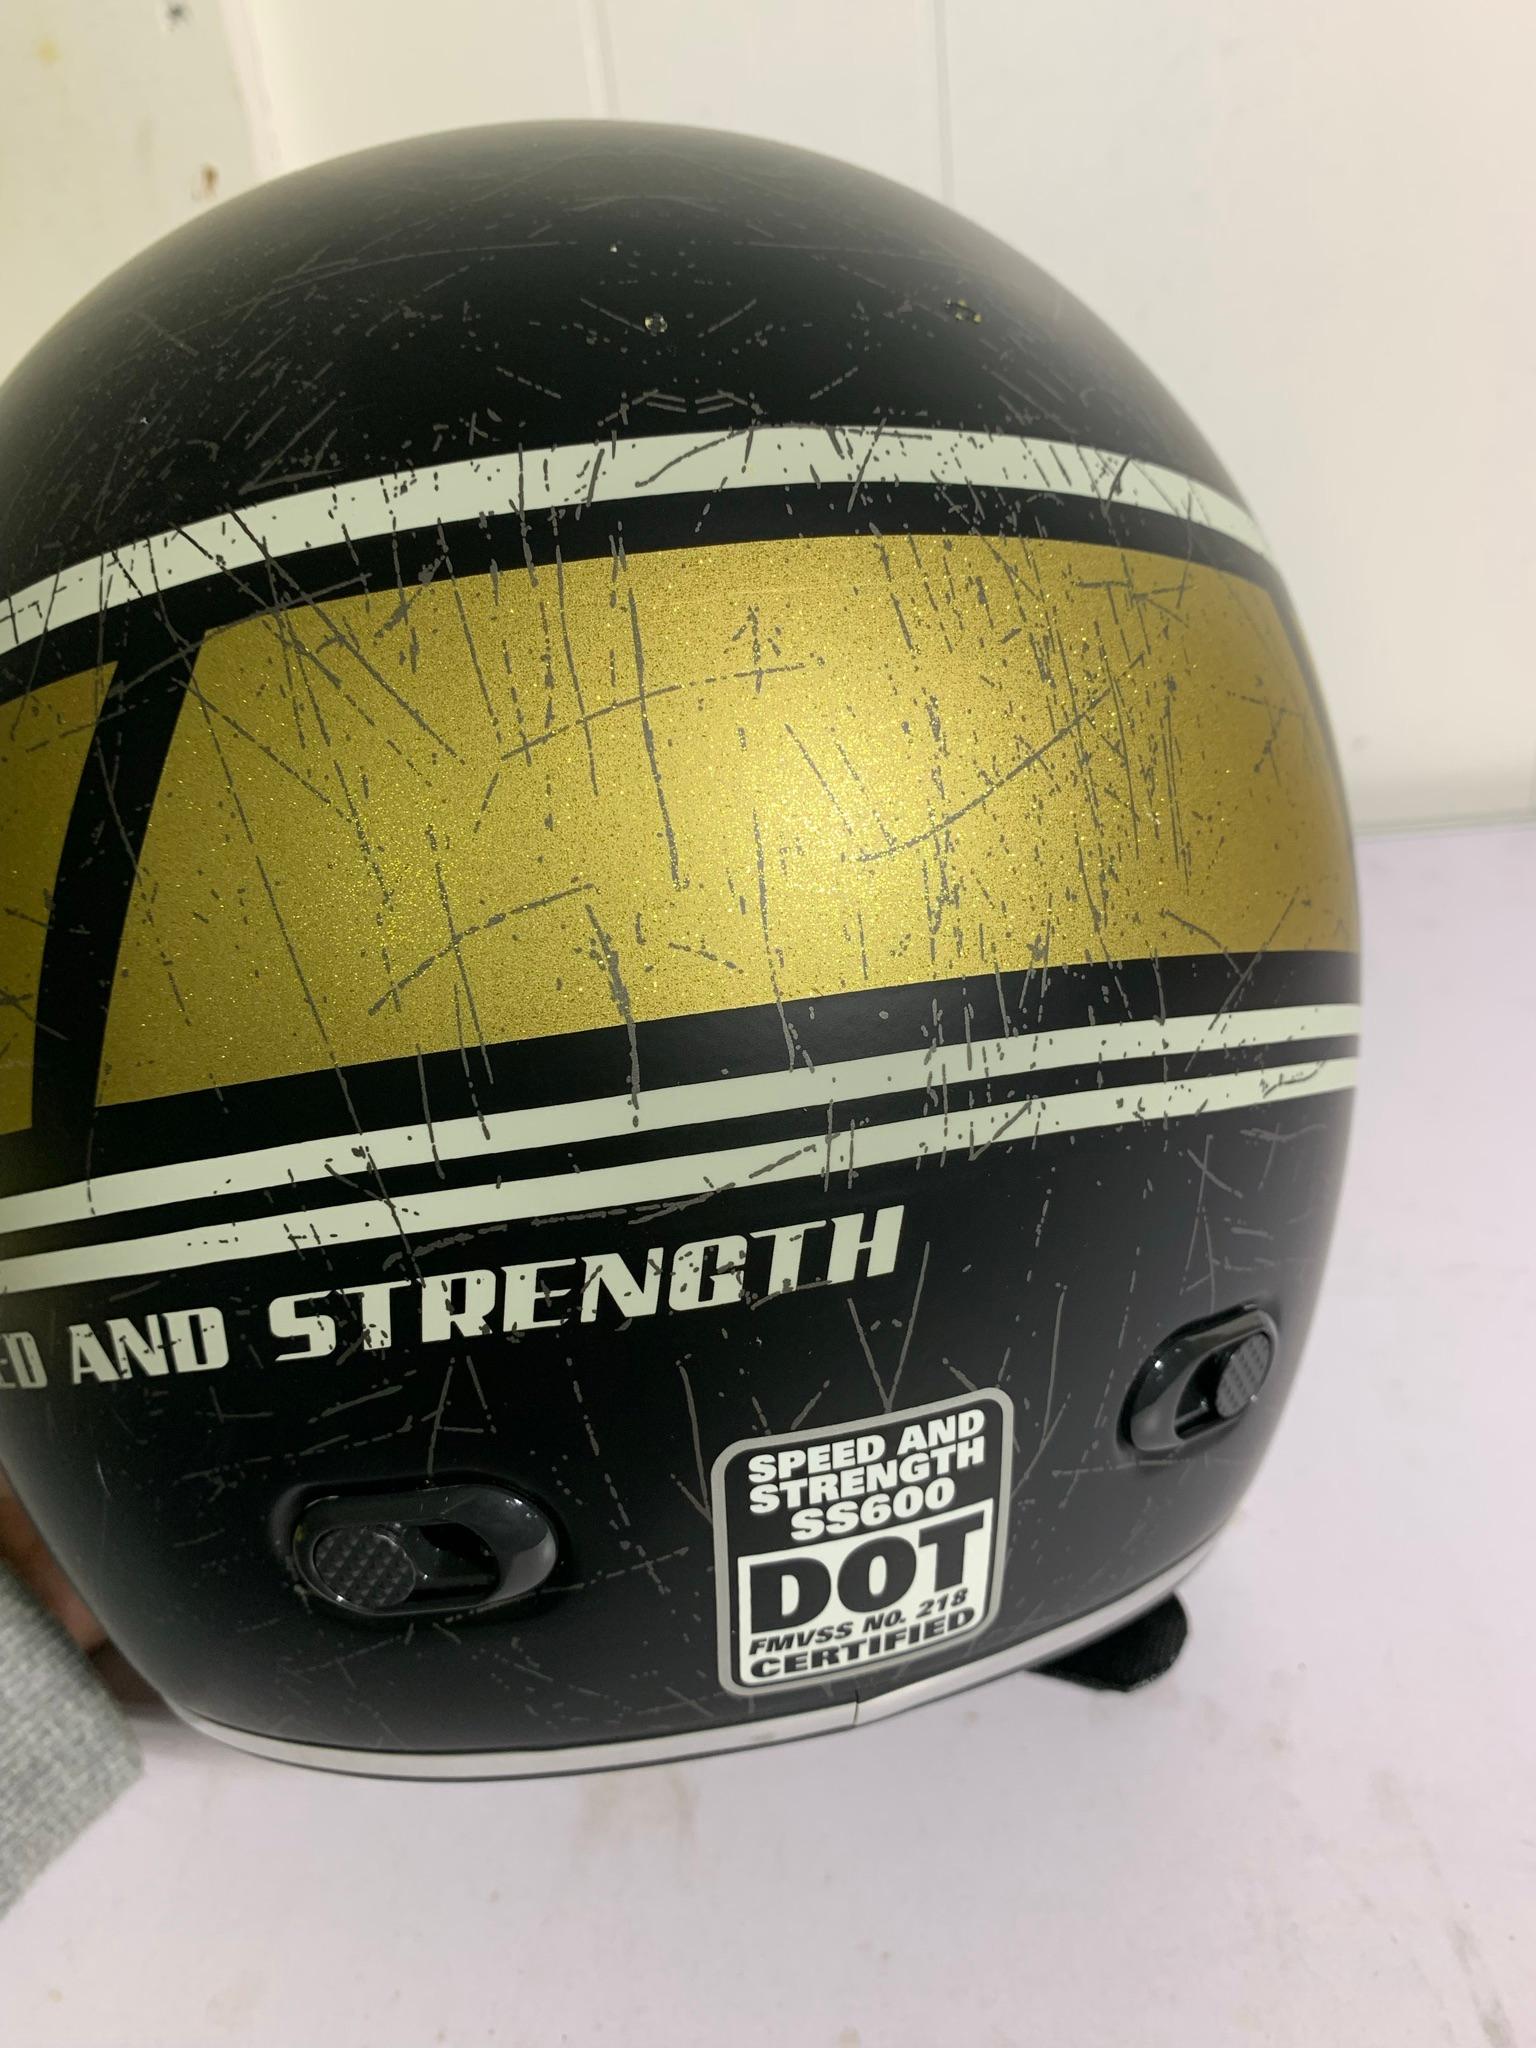 S/S Speed and Strength SS600 DOT FMVSS No. 218 Certified Helmet size Large